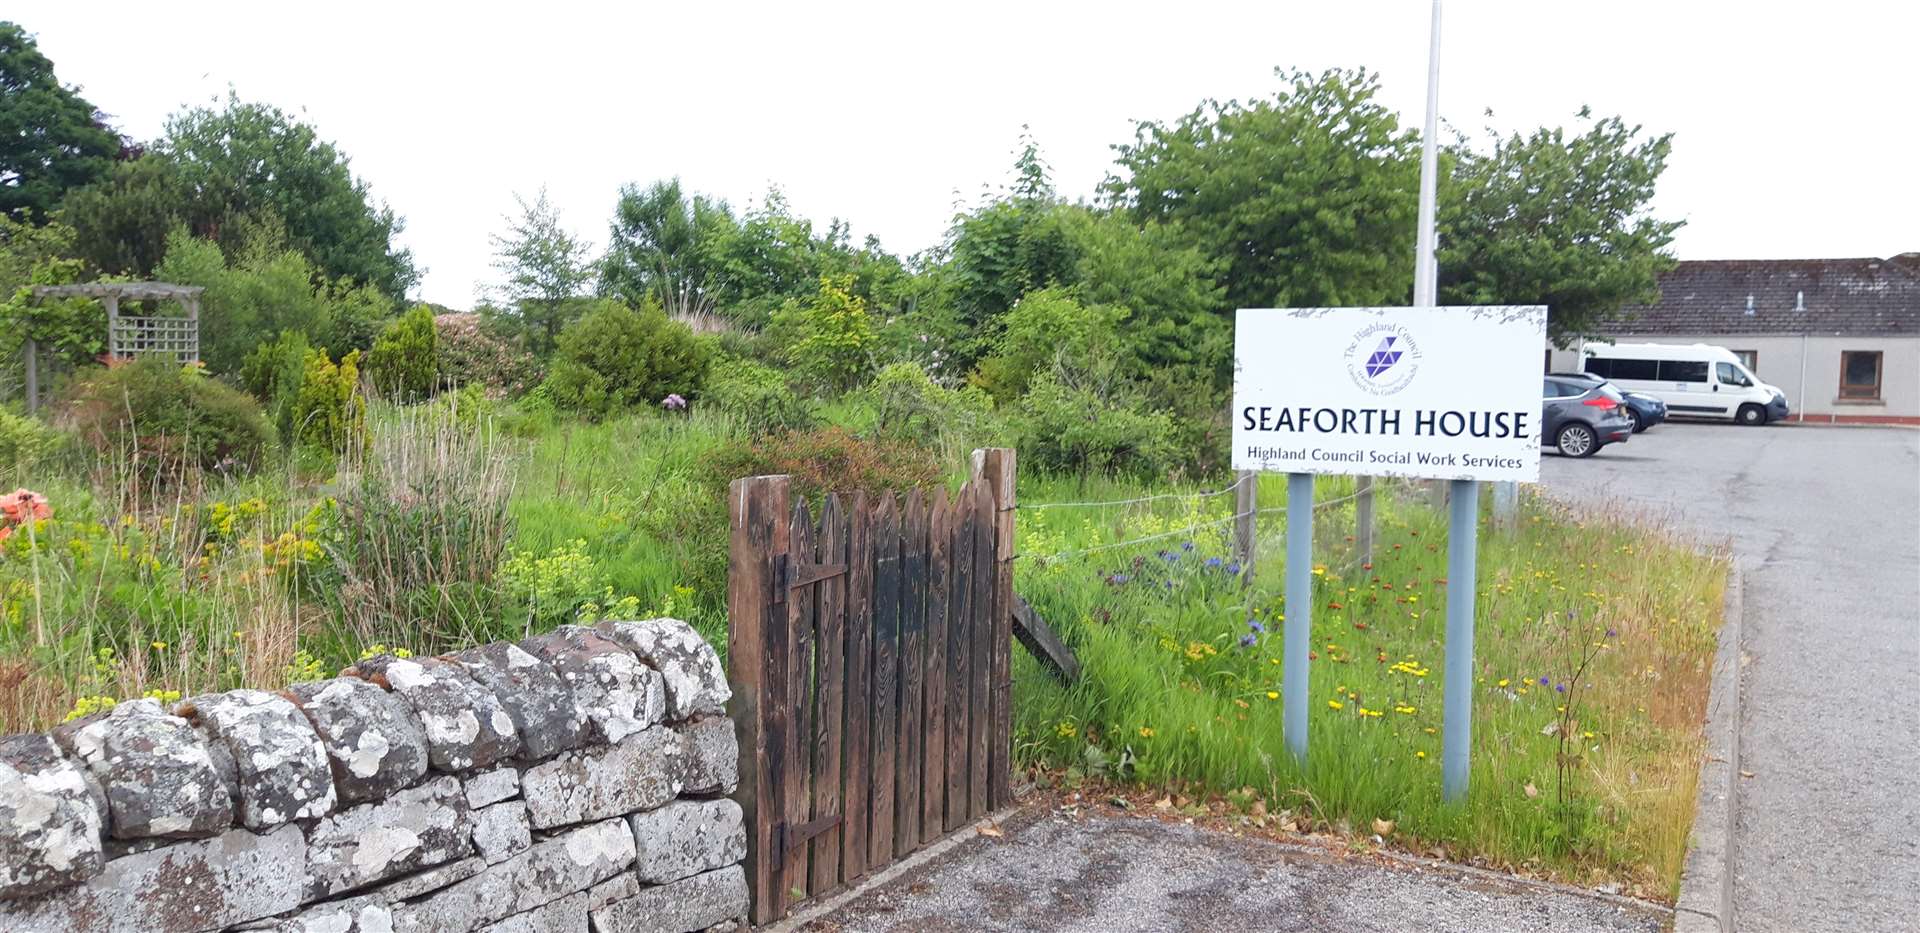 The Millennium Garden at Seaforth House has been identified as a possible site for bungalows for older people. The garden is no longer maintained.